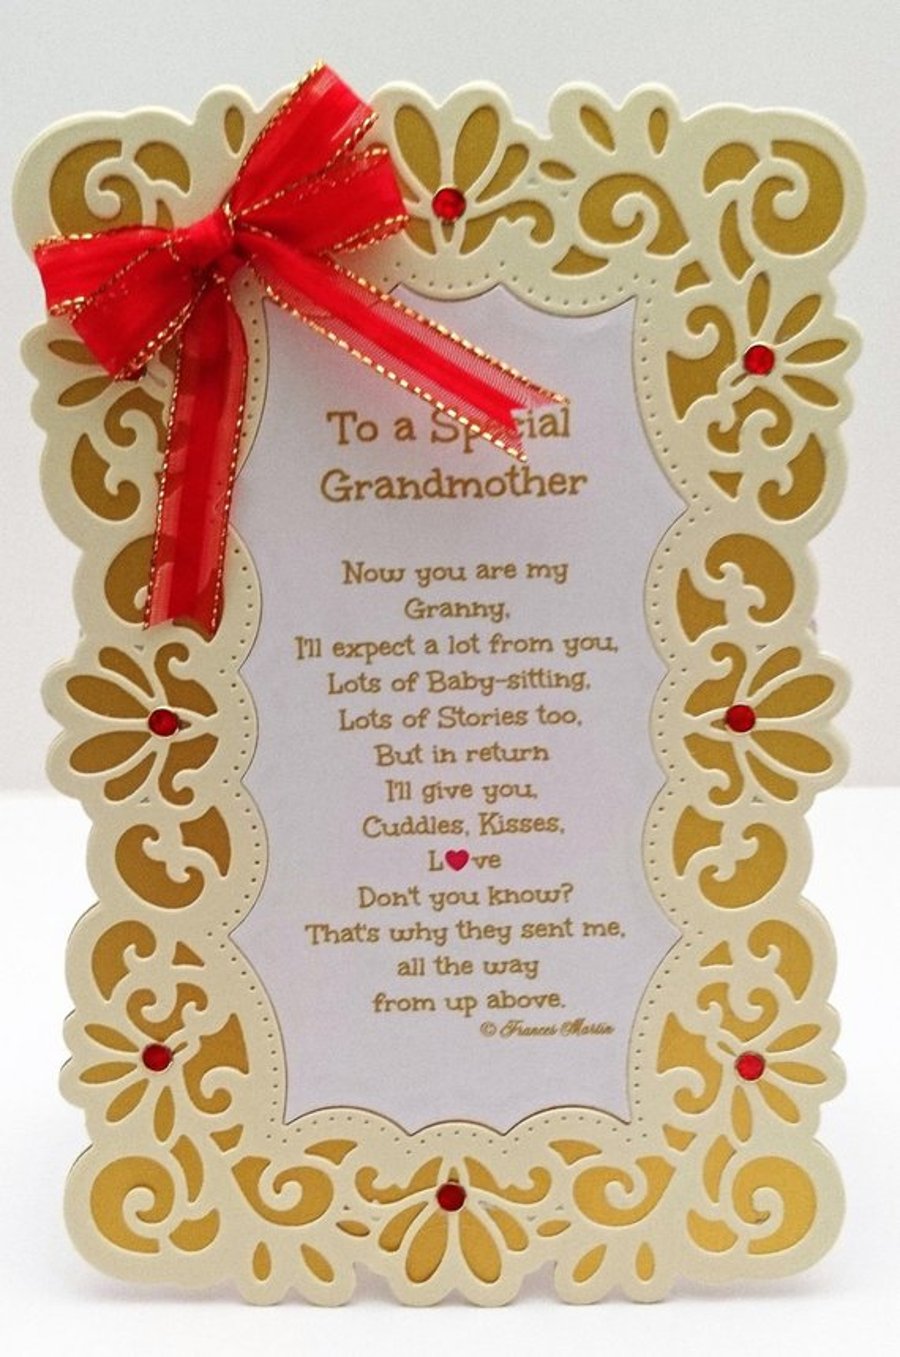 New Baby Card,To A Special Grandmother Keepsake Card with Verse, FREE P&P to UK 